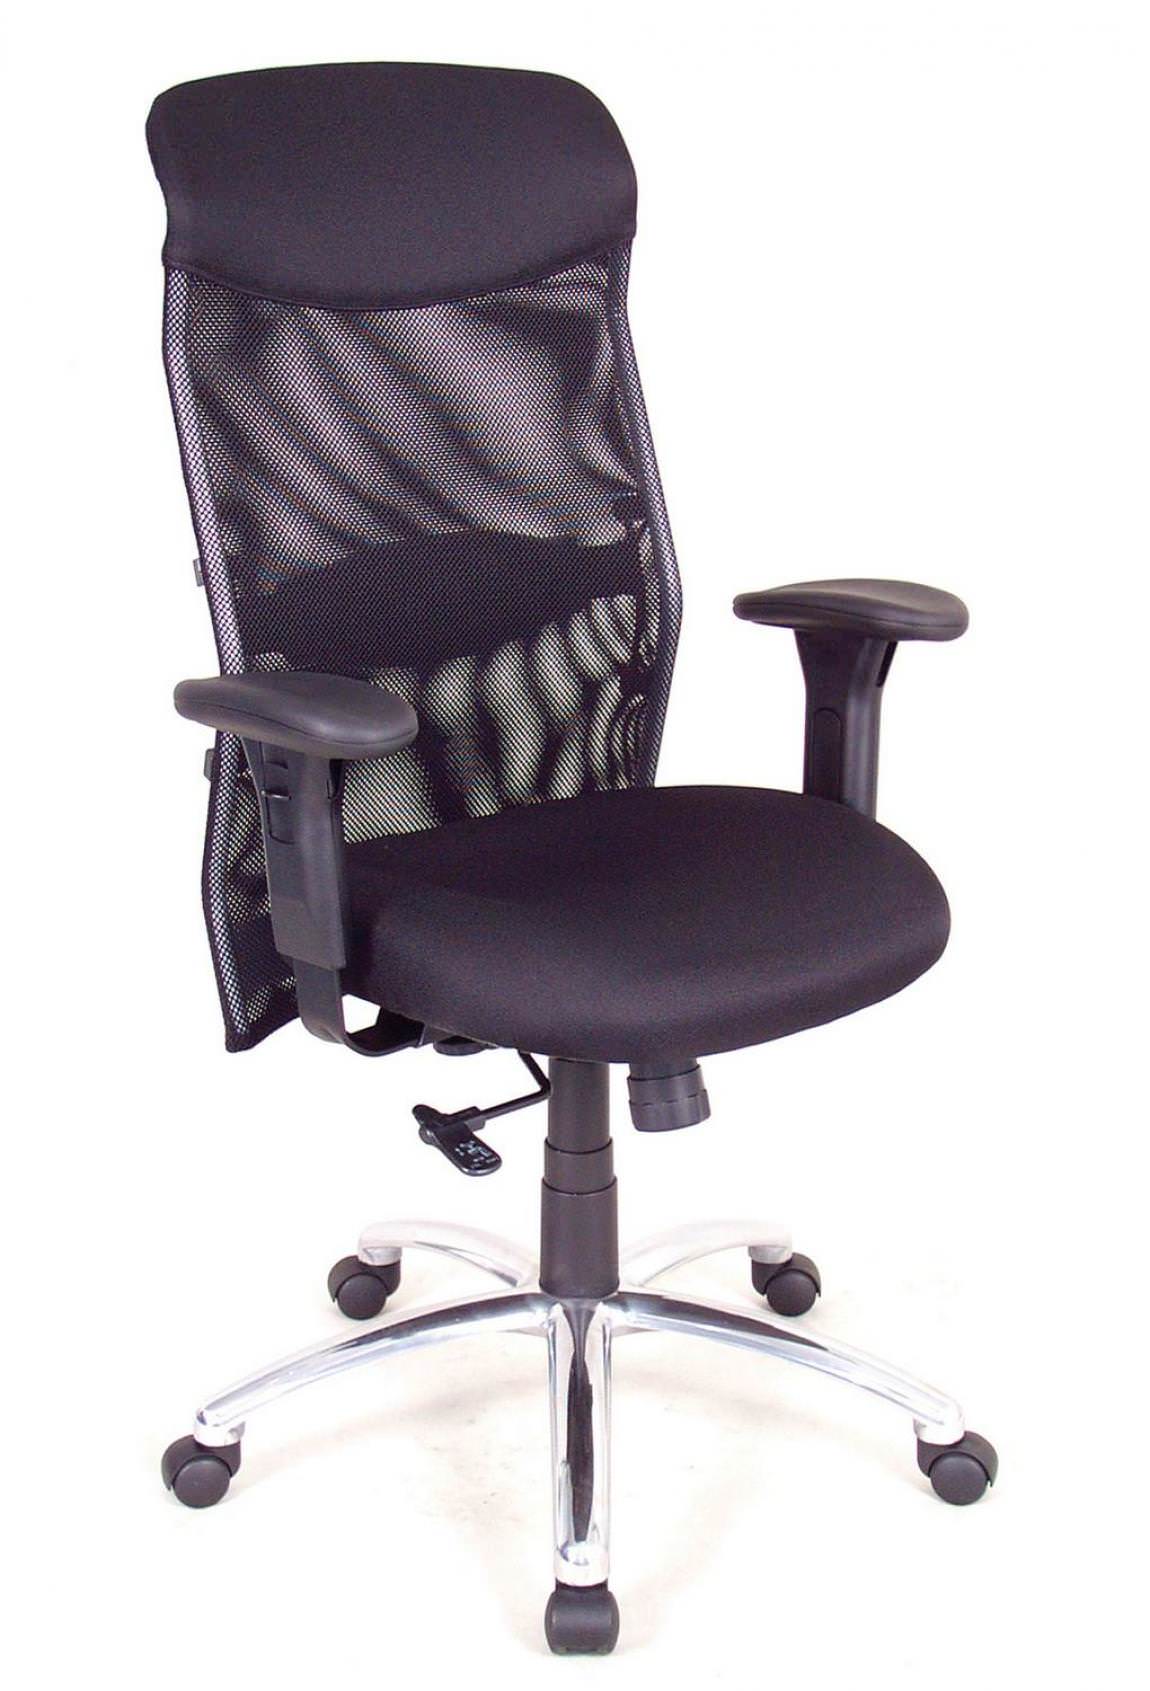 Mani-Chord Mesh Executive High-Back Chair with Arms